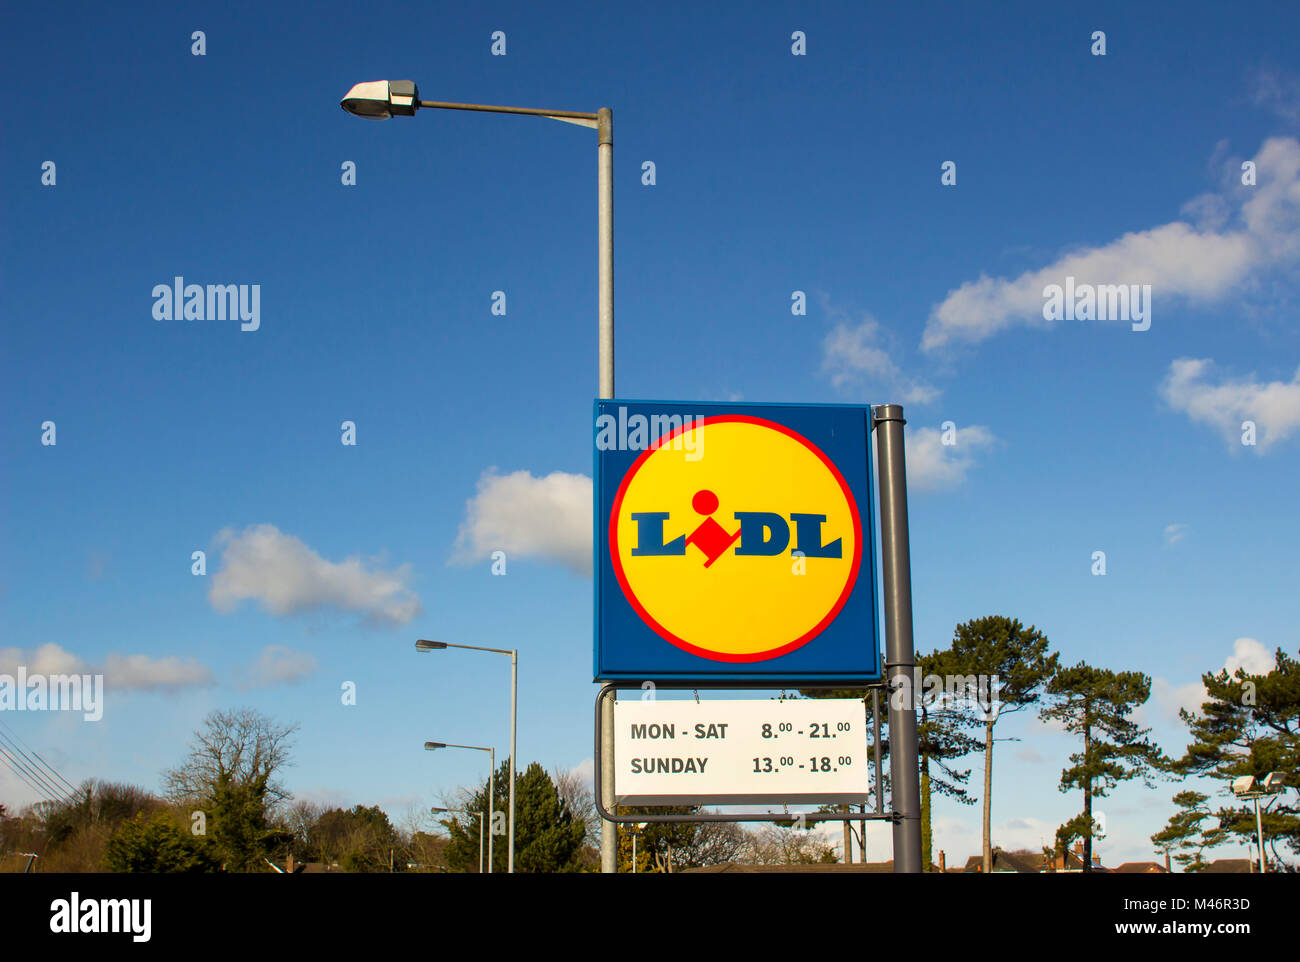 The car park and signage of the Lidl Supermarket on the Circular road in Bangor County Down on a dull midwinter day Stock Photo